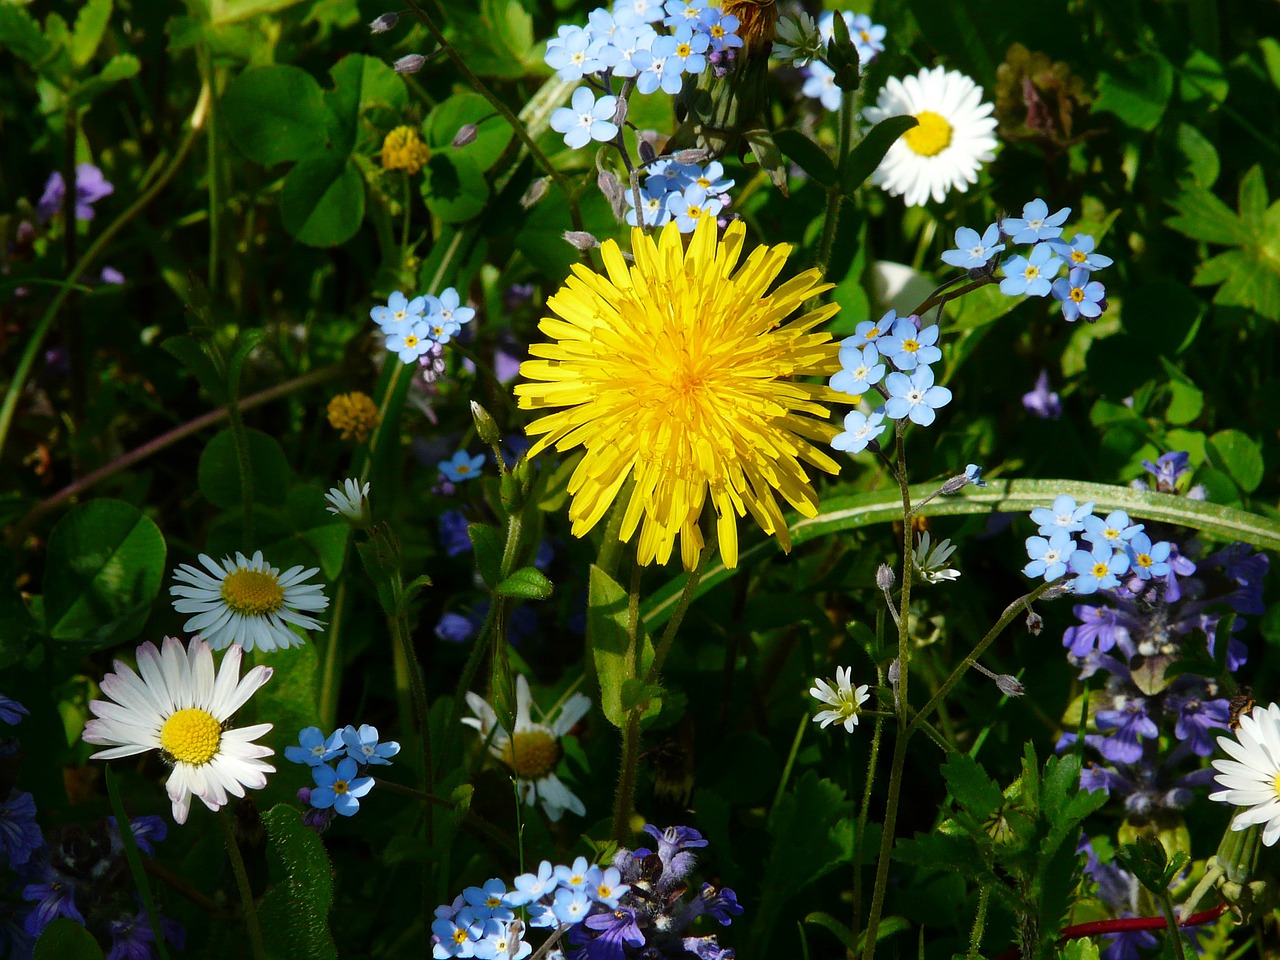 meadow,dandelion,wildflowers,forget me not,daisy,free pictures, free photos, free images, royalty free, free illustrations, public domain